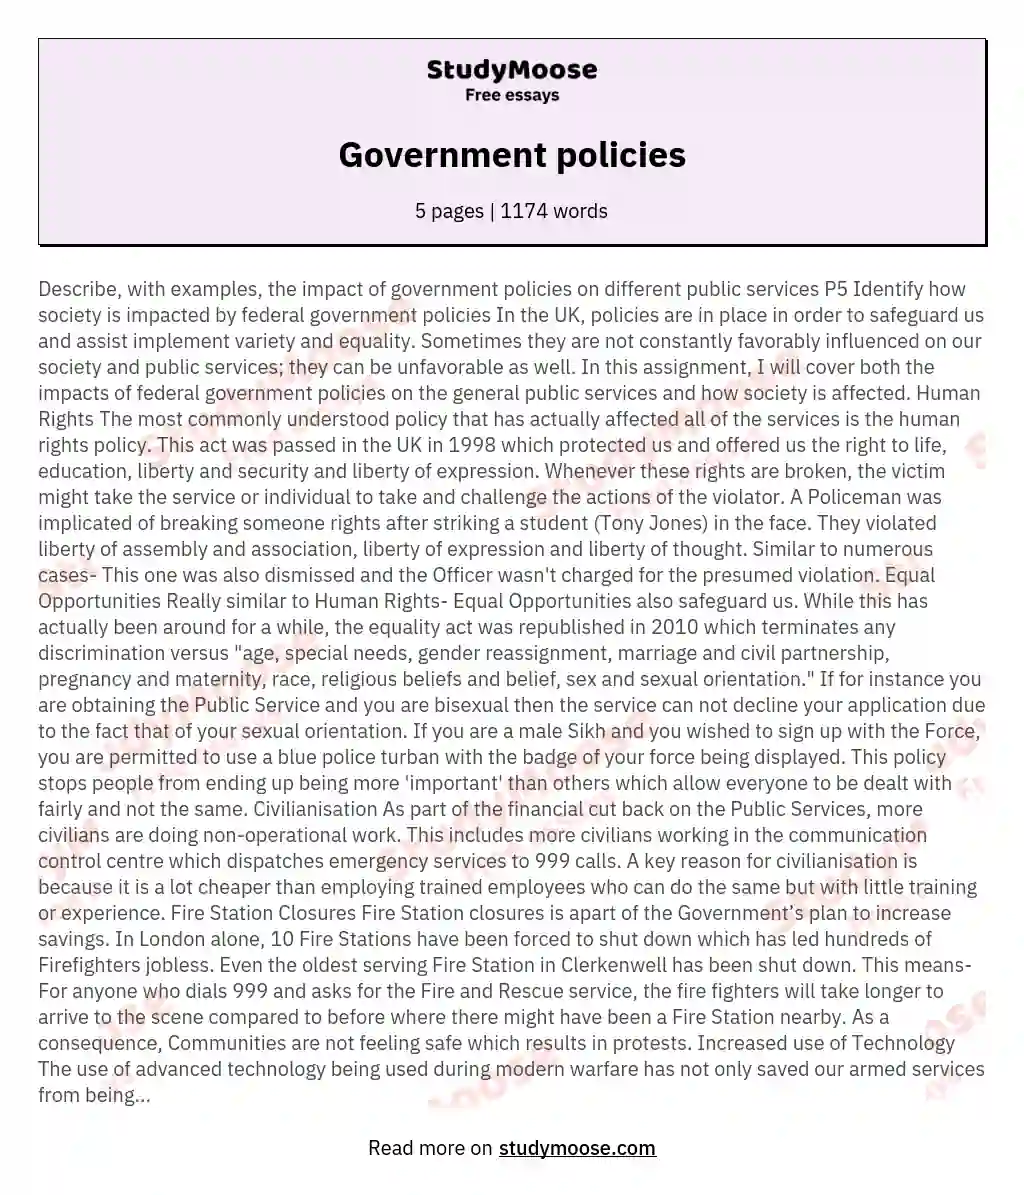 Government policies essay